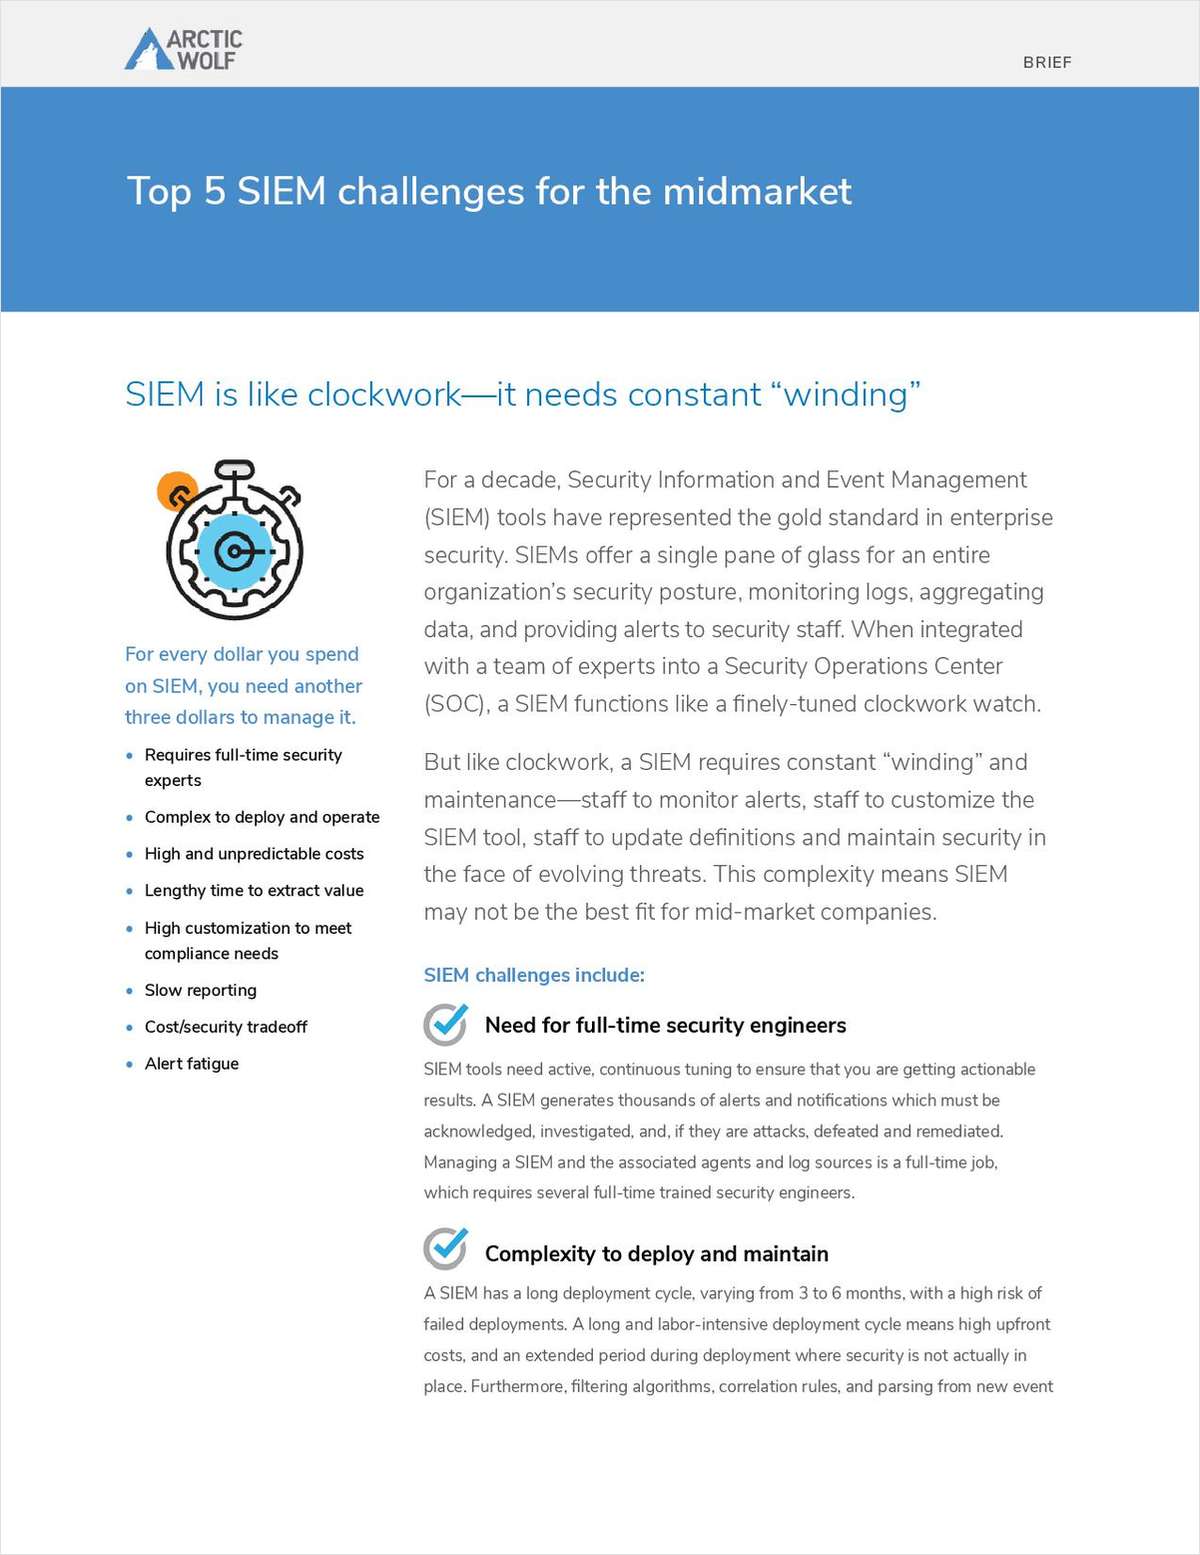 Top 5 SIEM Challenges for the MidMarket